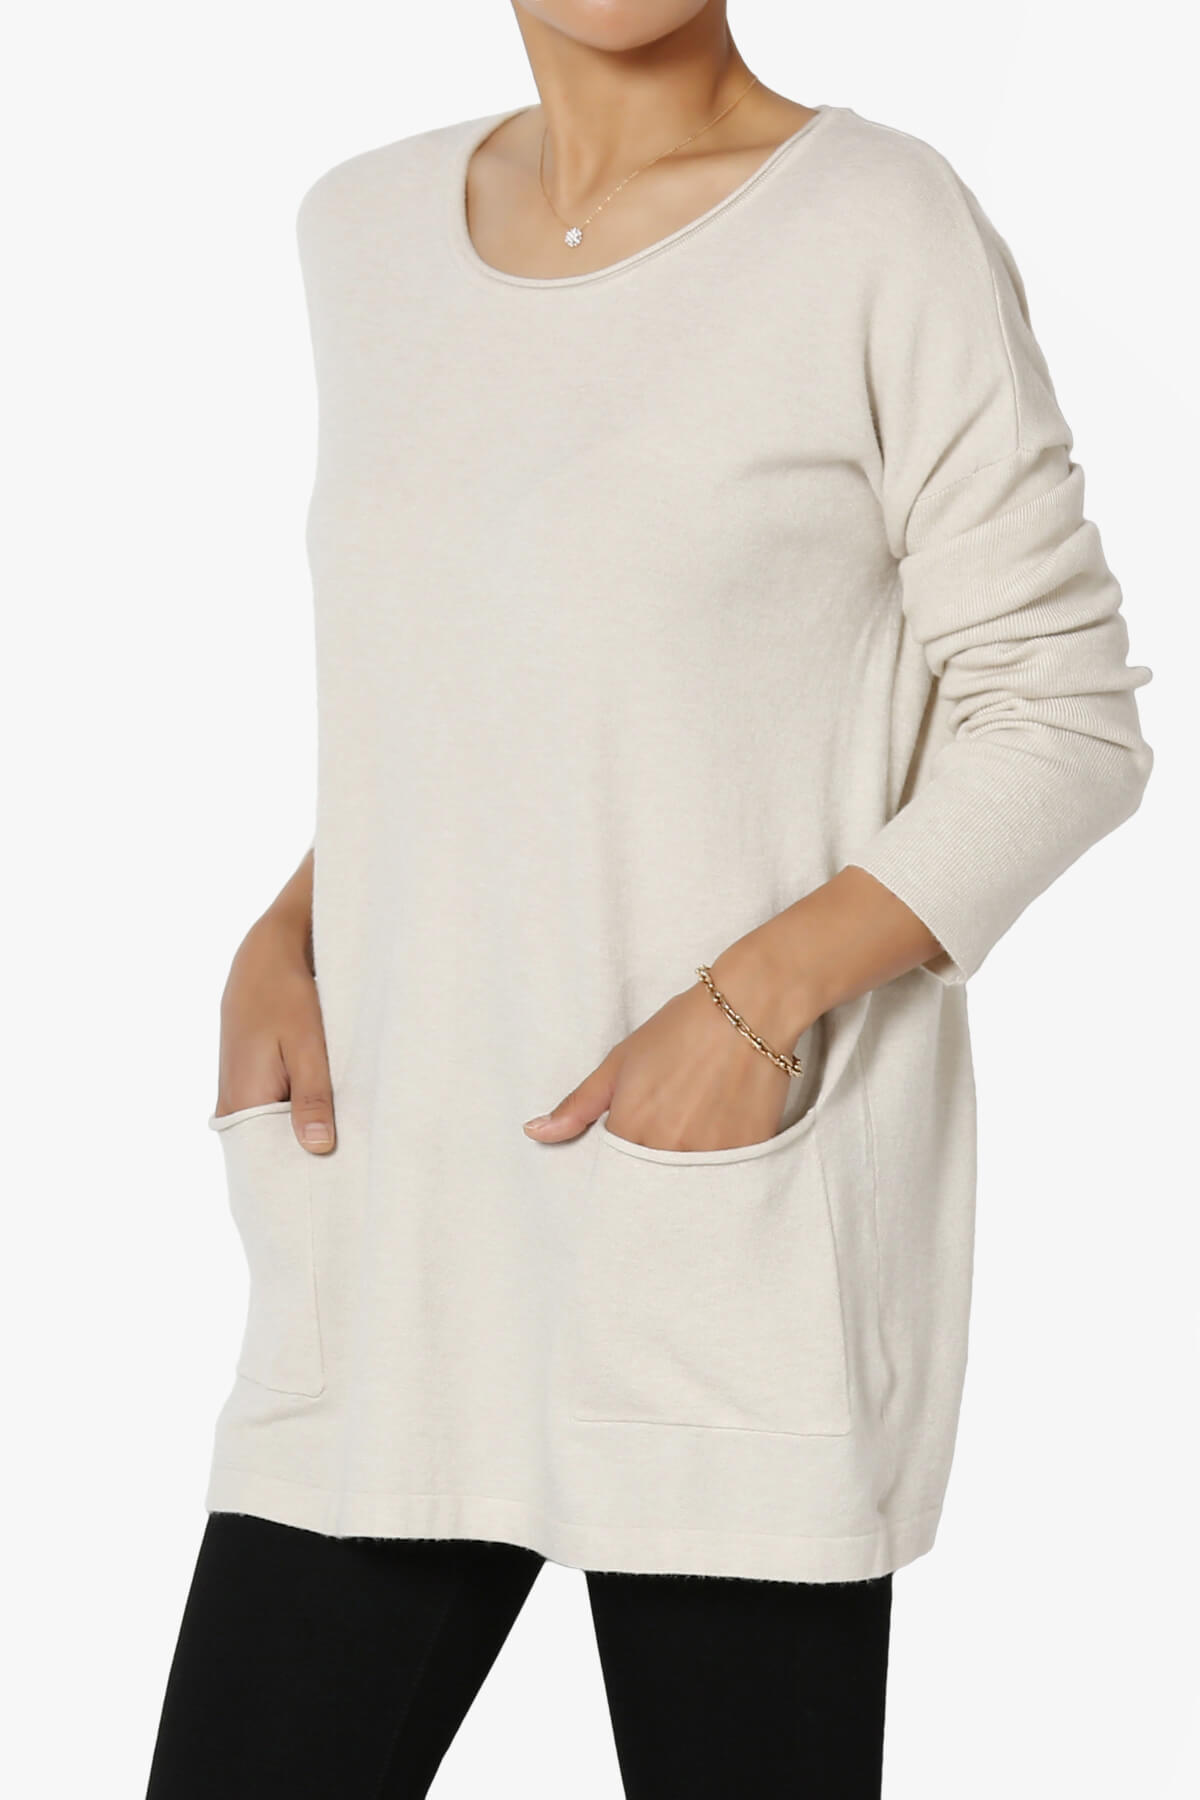 Load image into Gallery viewer, Brecken Pocket Long Sleeve Soft Knit Sweater Tunic SAND BEIGE_3
